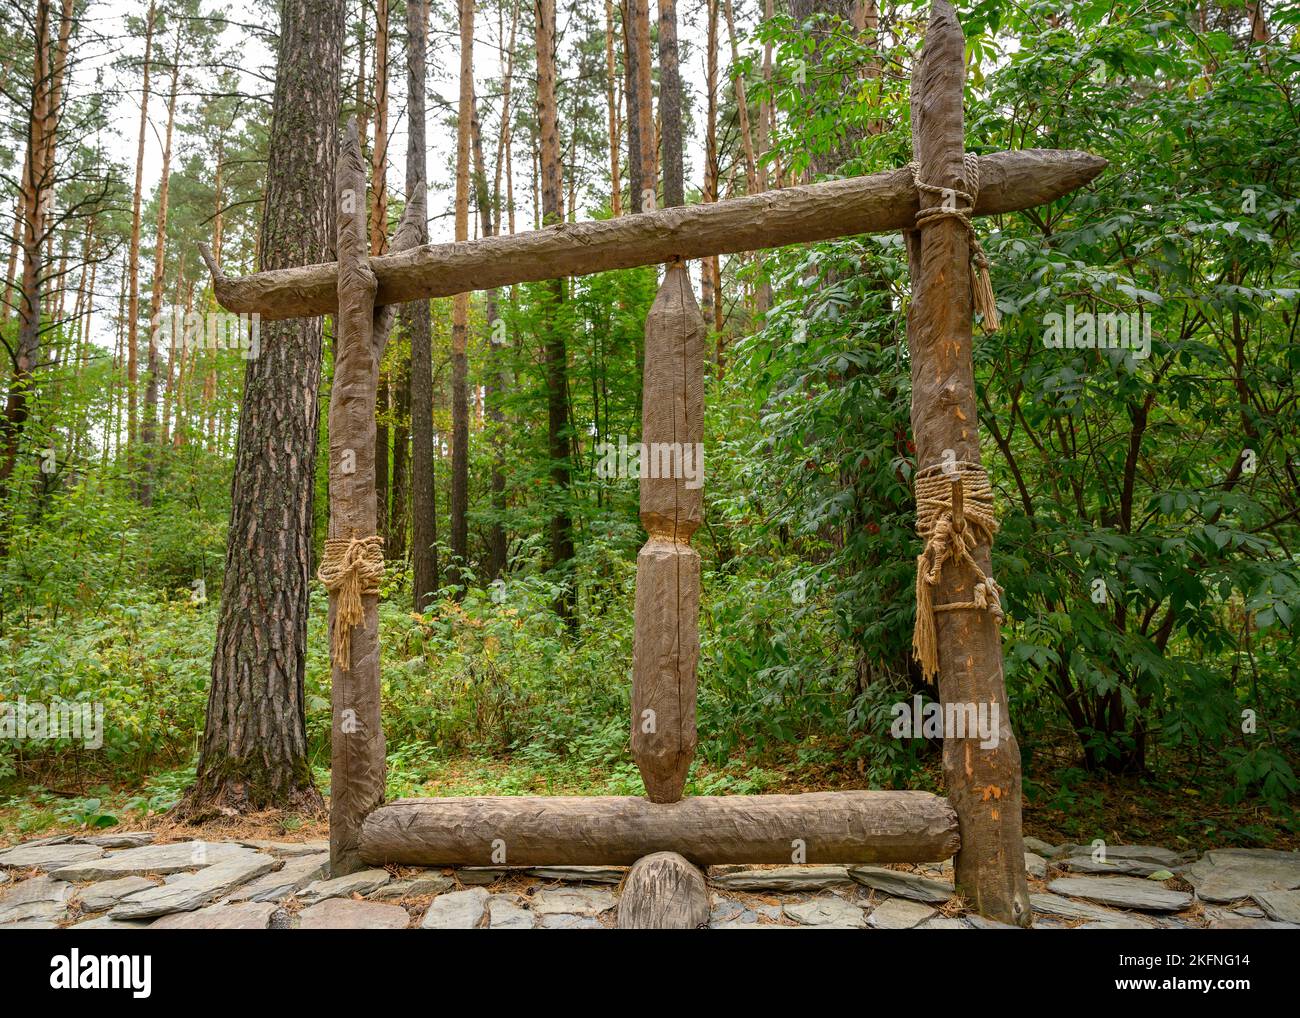 Reconstruction of ancient East Slavic mechanism for obtaining 'Living Fire' during religious rituals Stock Photo